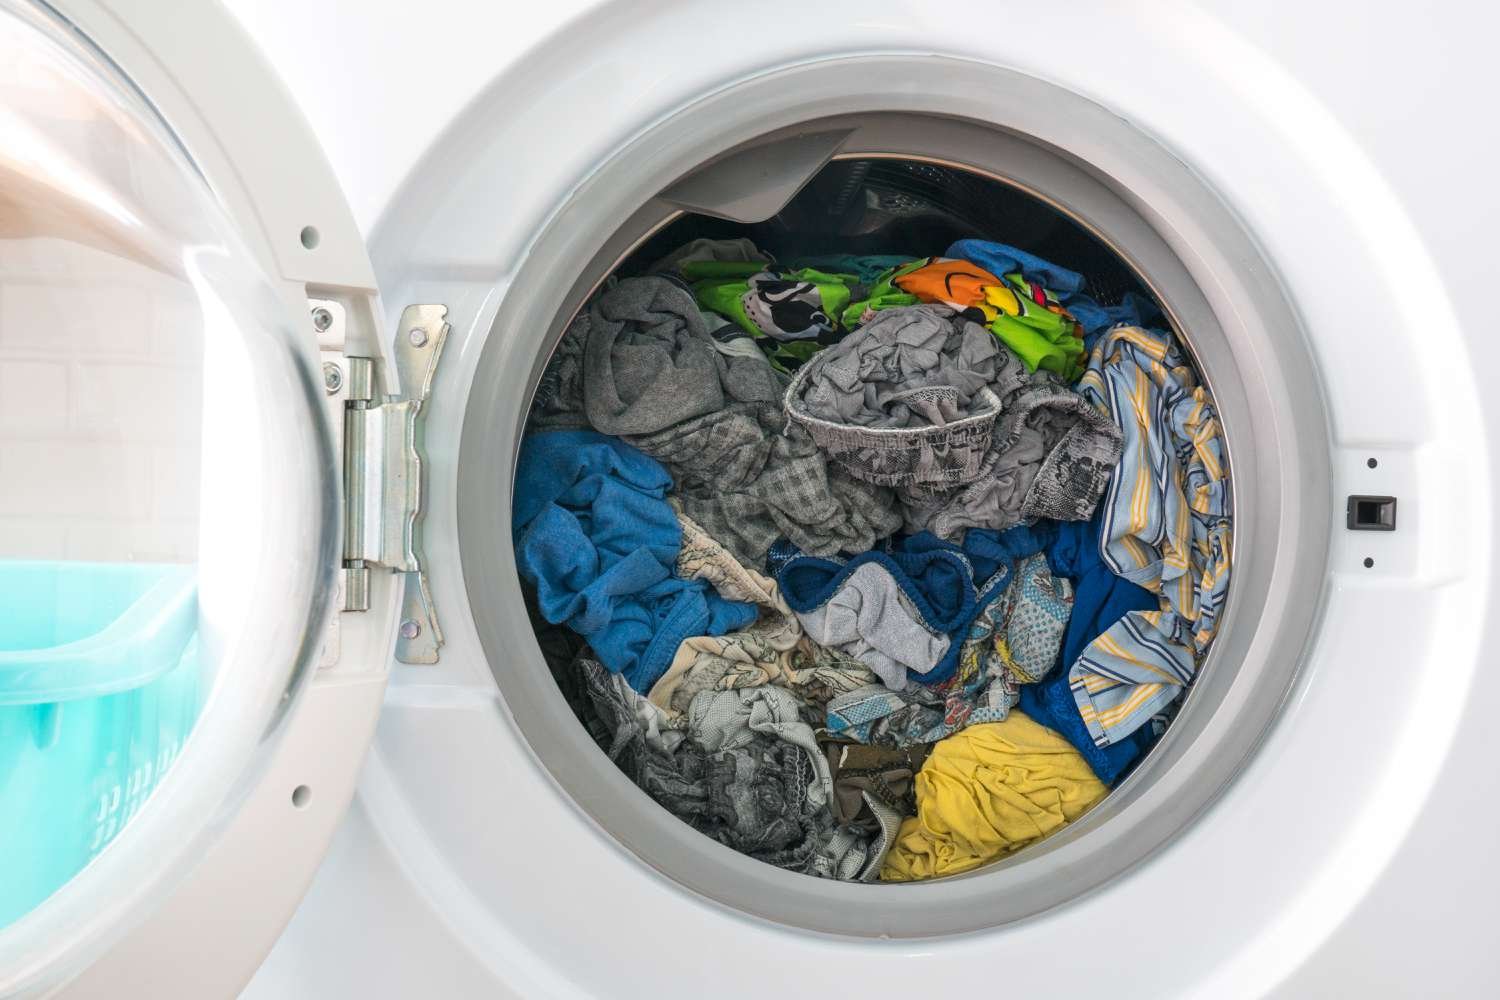 How Do You Know If Washing Machine Is Overloaded?